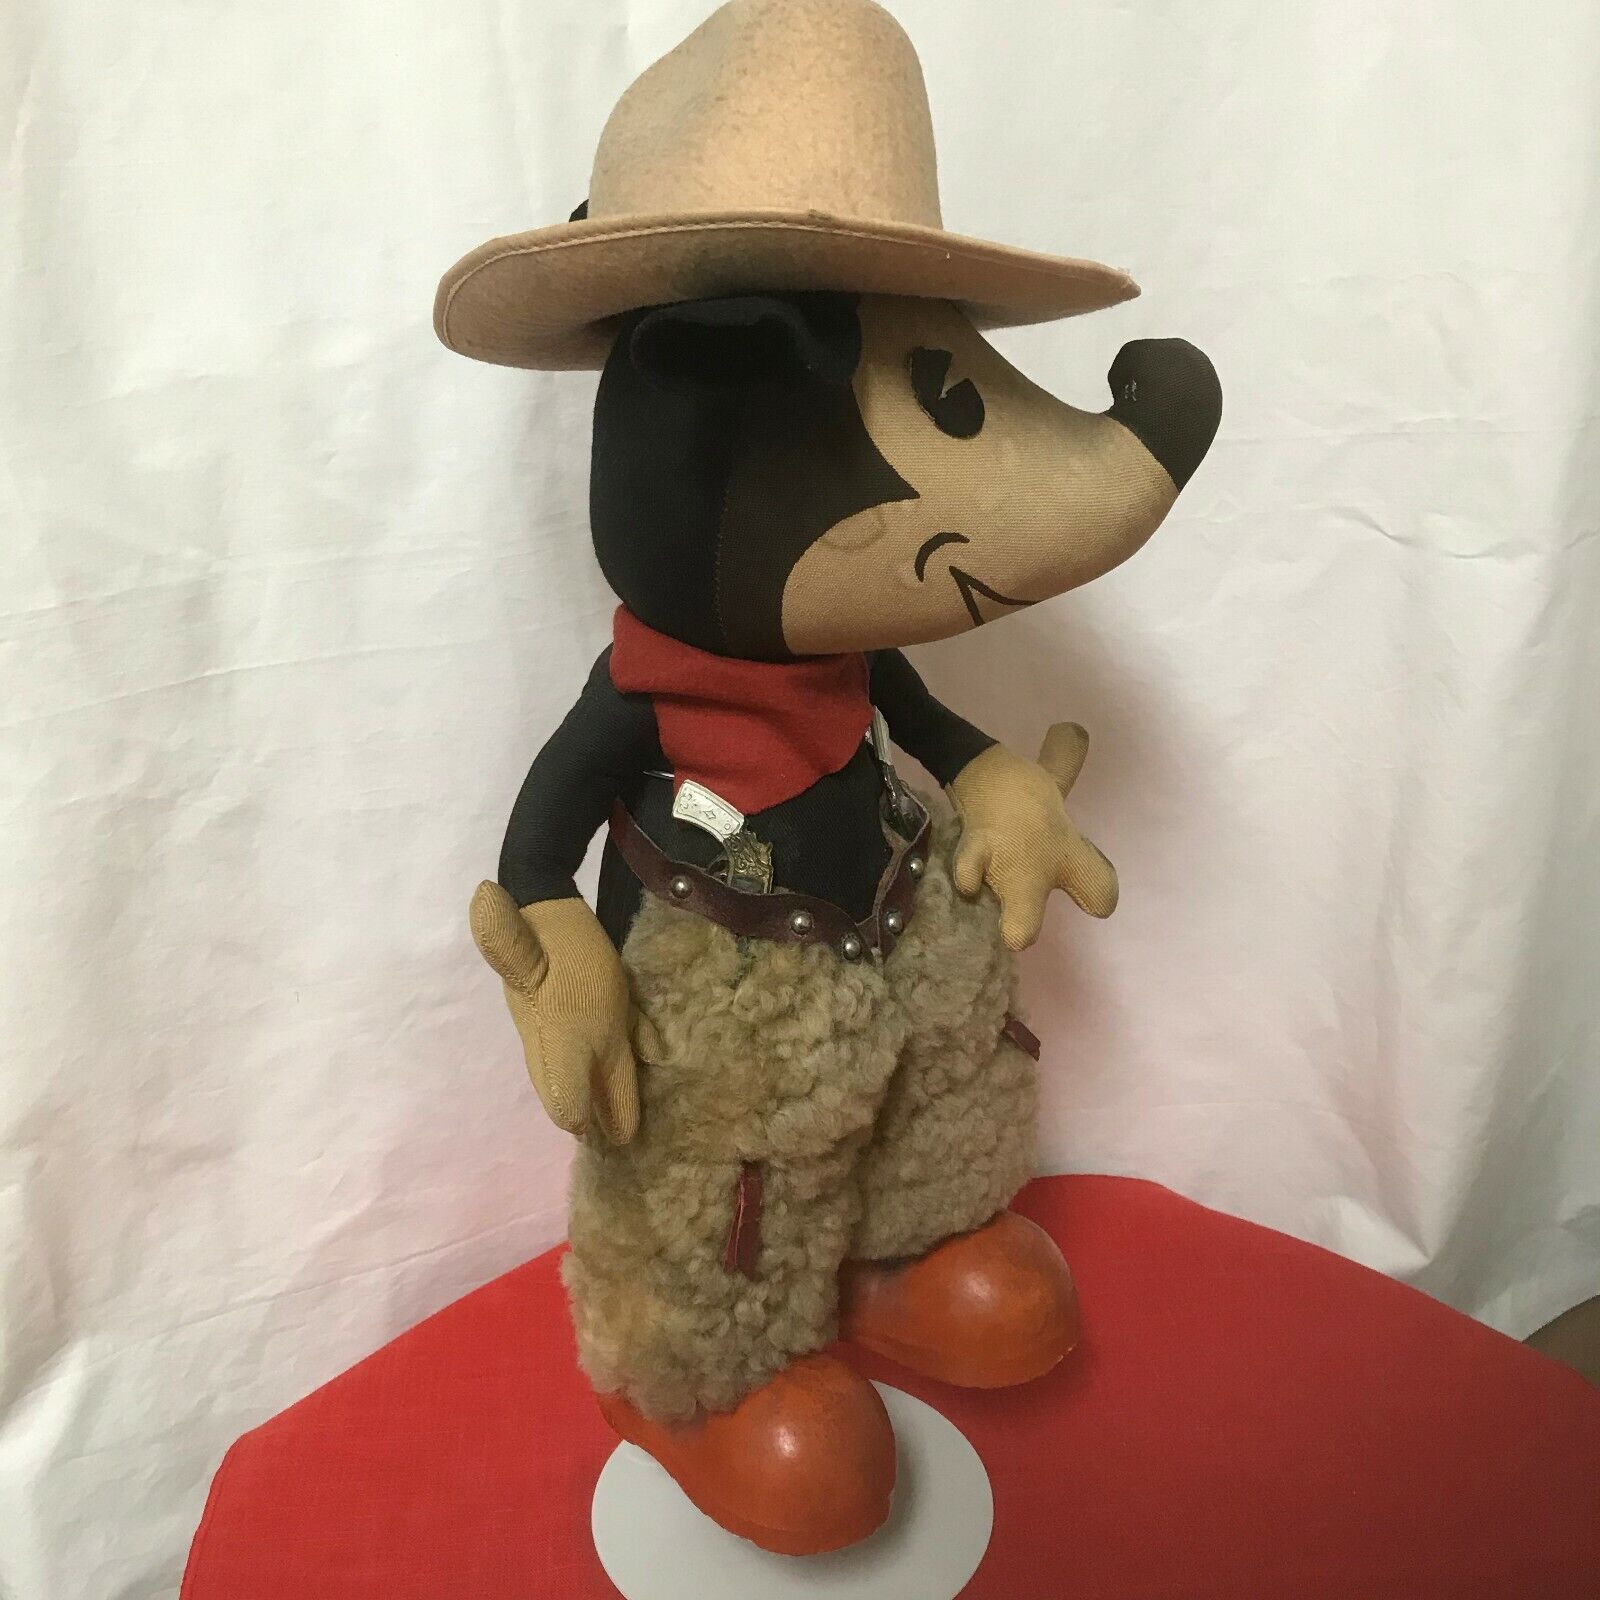 1930's Knickerbocker “Two Gun” Mickey Mouse, Good condition as shown in photos